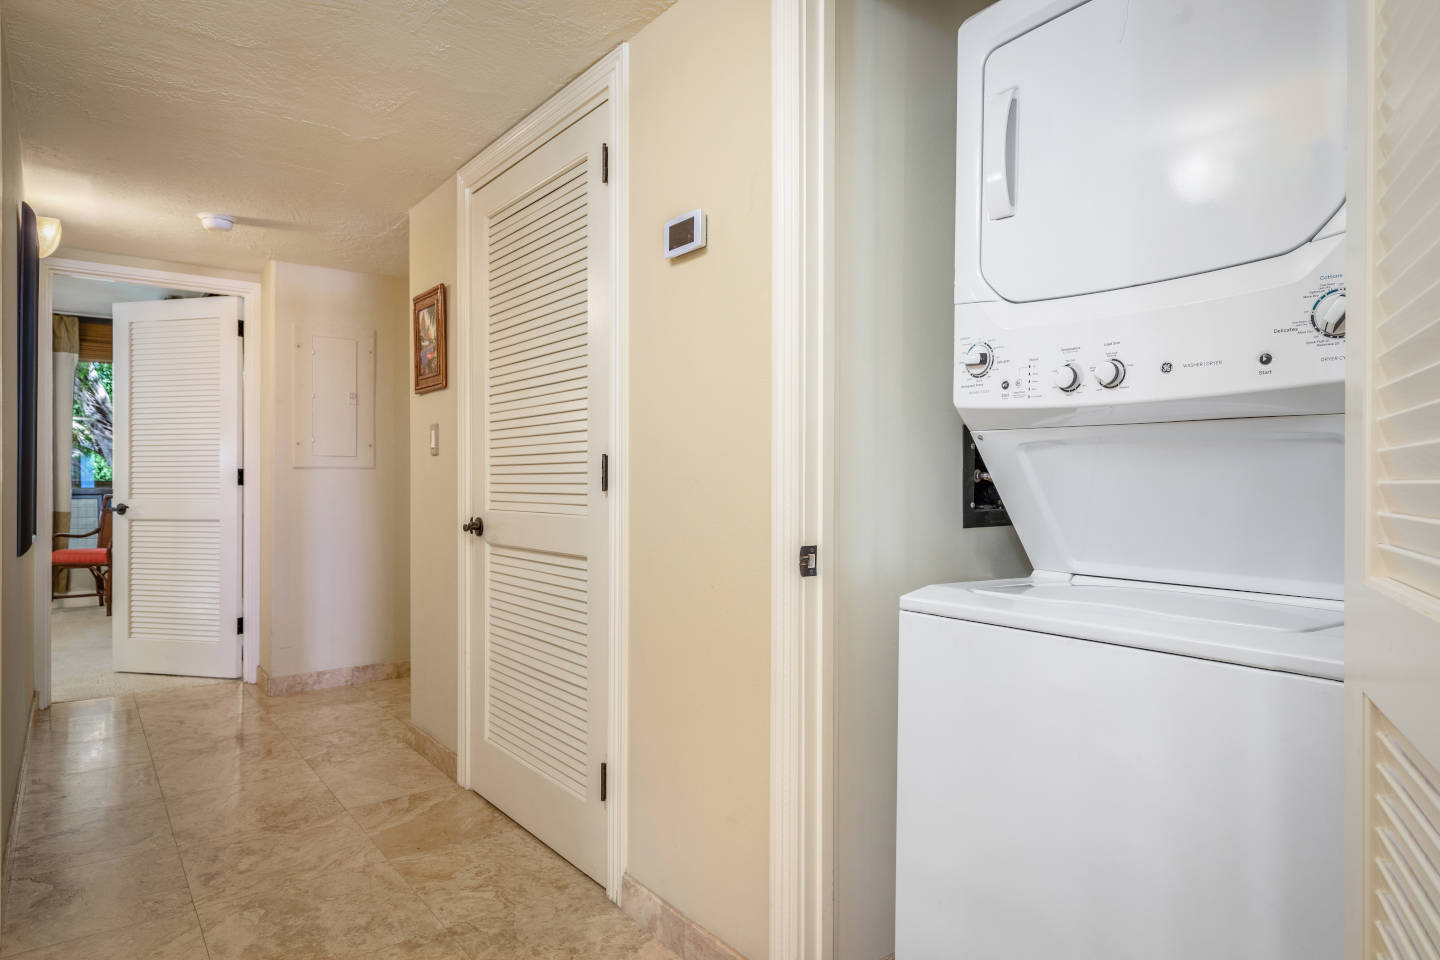 Standalone washer and dryer combo unit in-room that is tucked away in the hallway area of the one-bedroom oceanfront unit